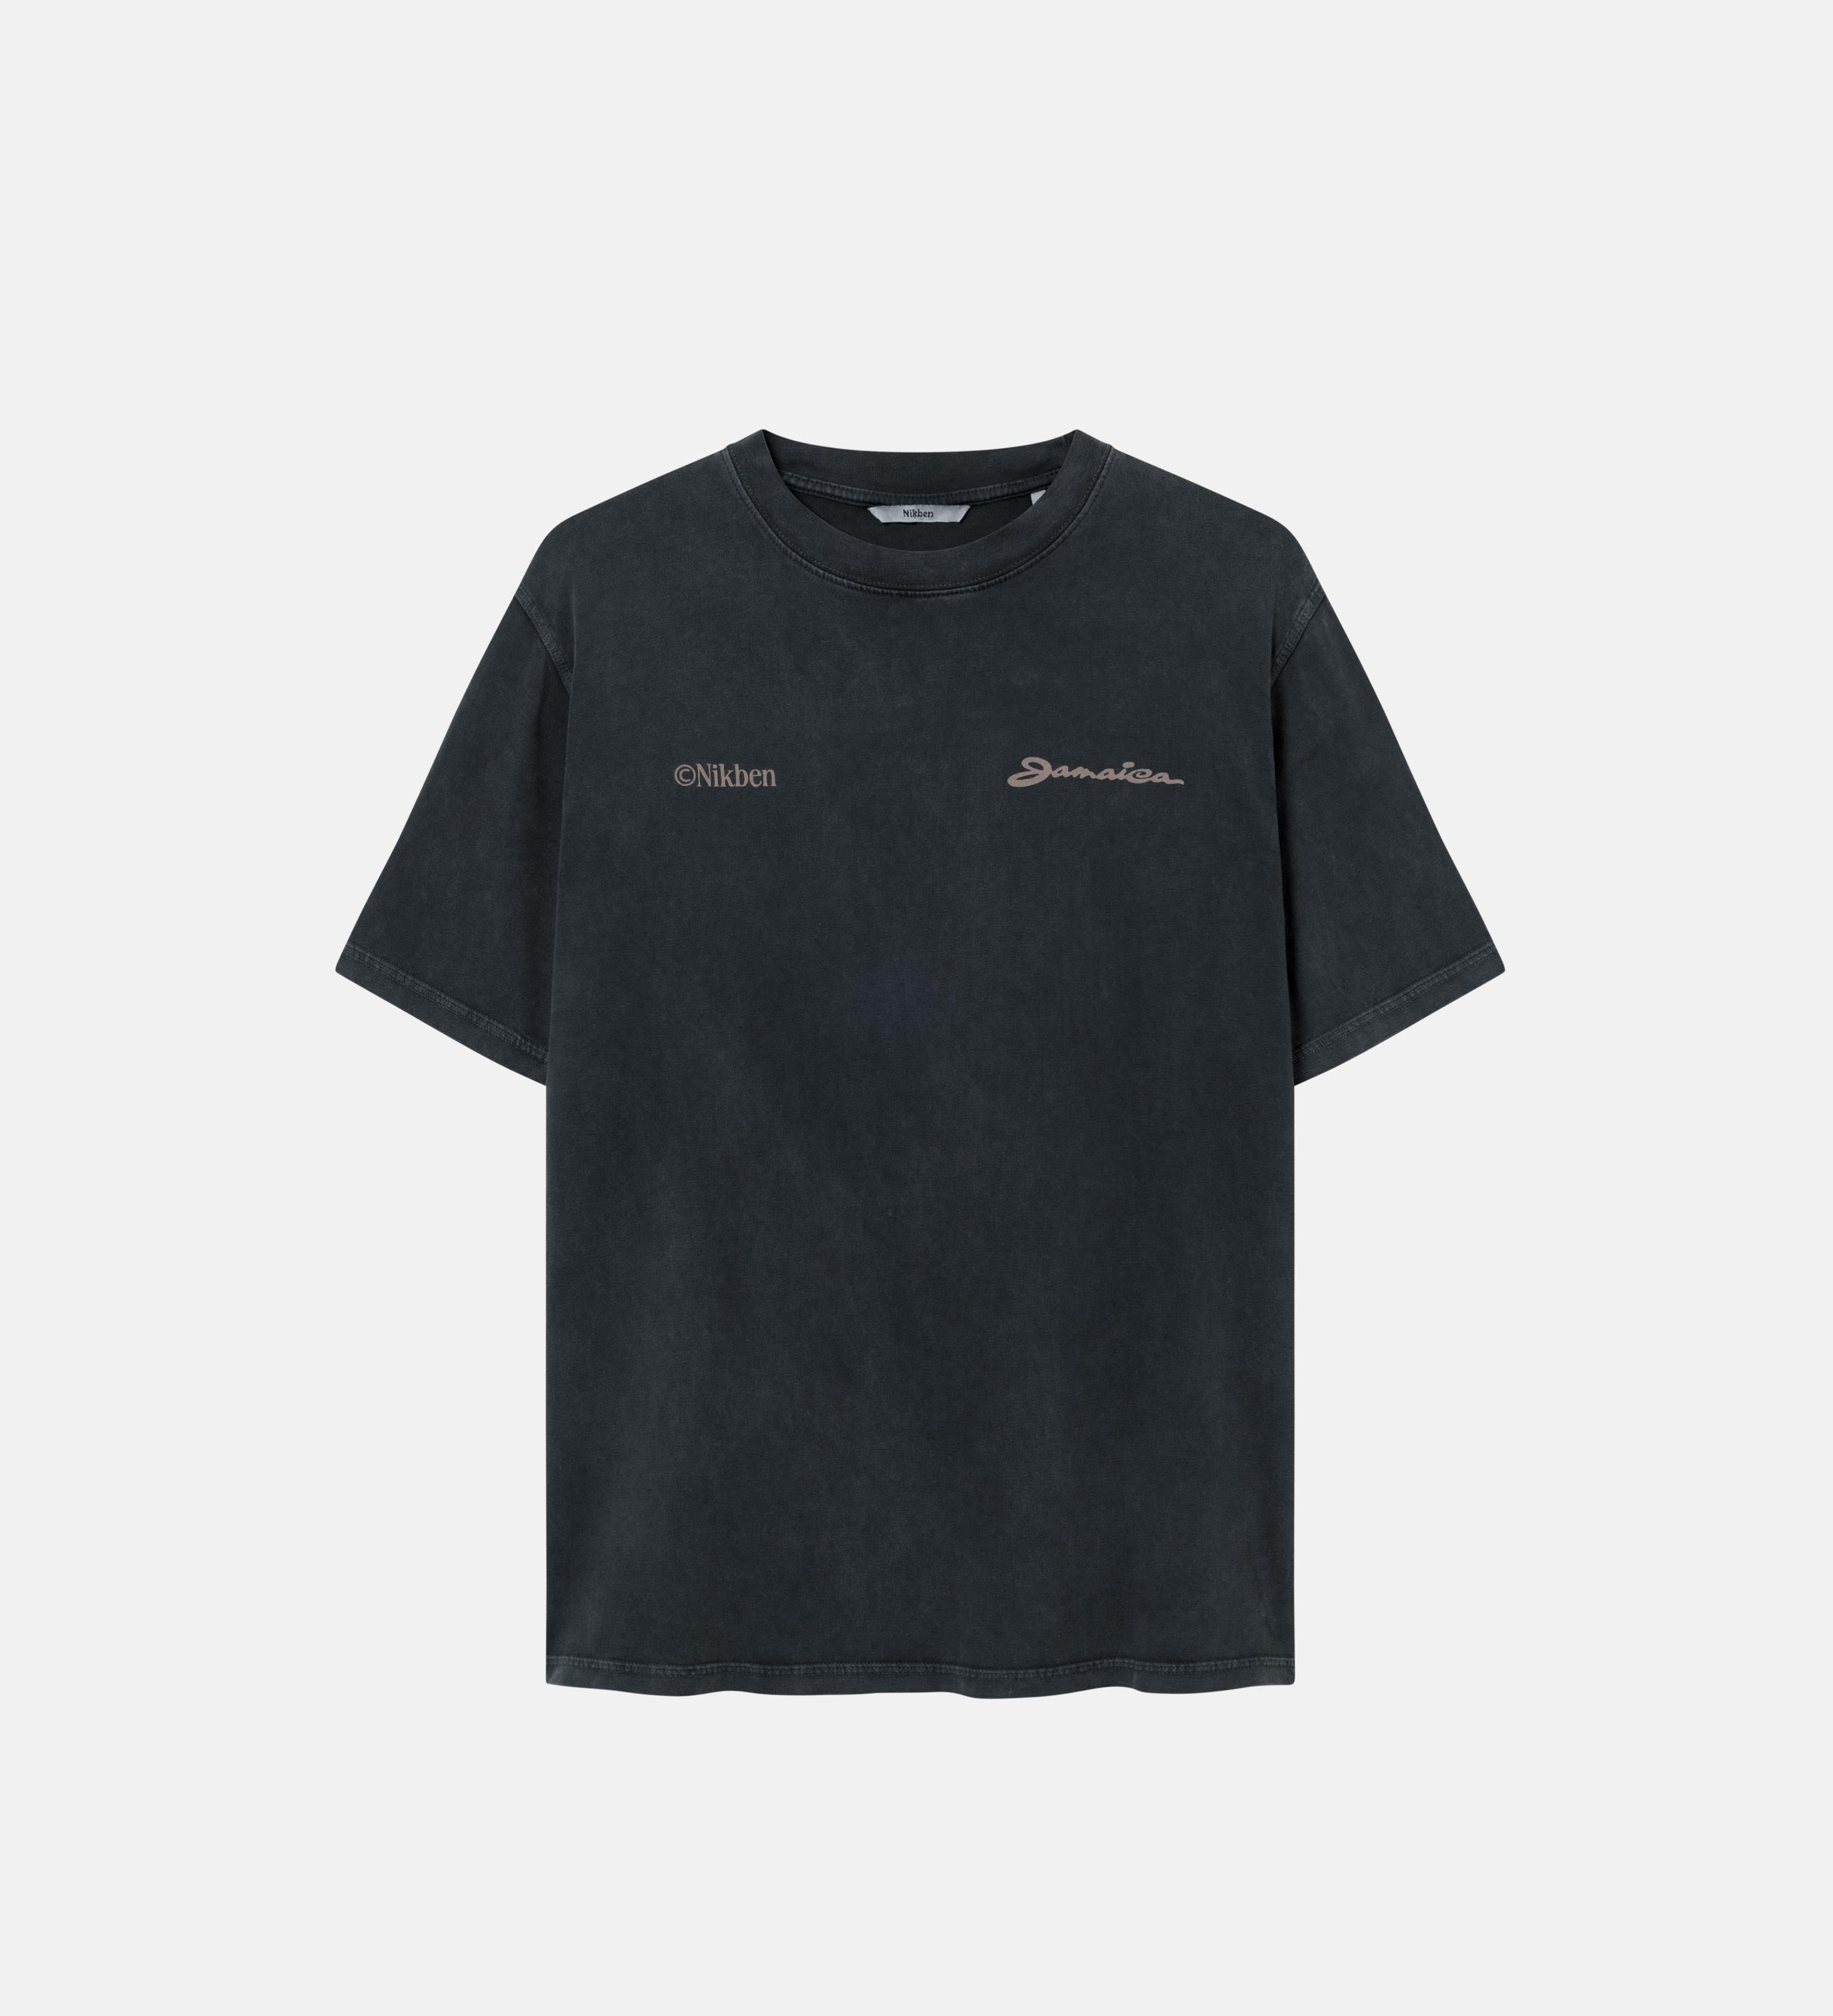 A sand colored t-shirt with "jamaica" text print on a black garment dyed t-shirt 